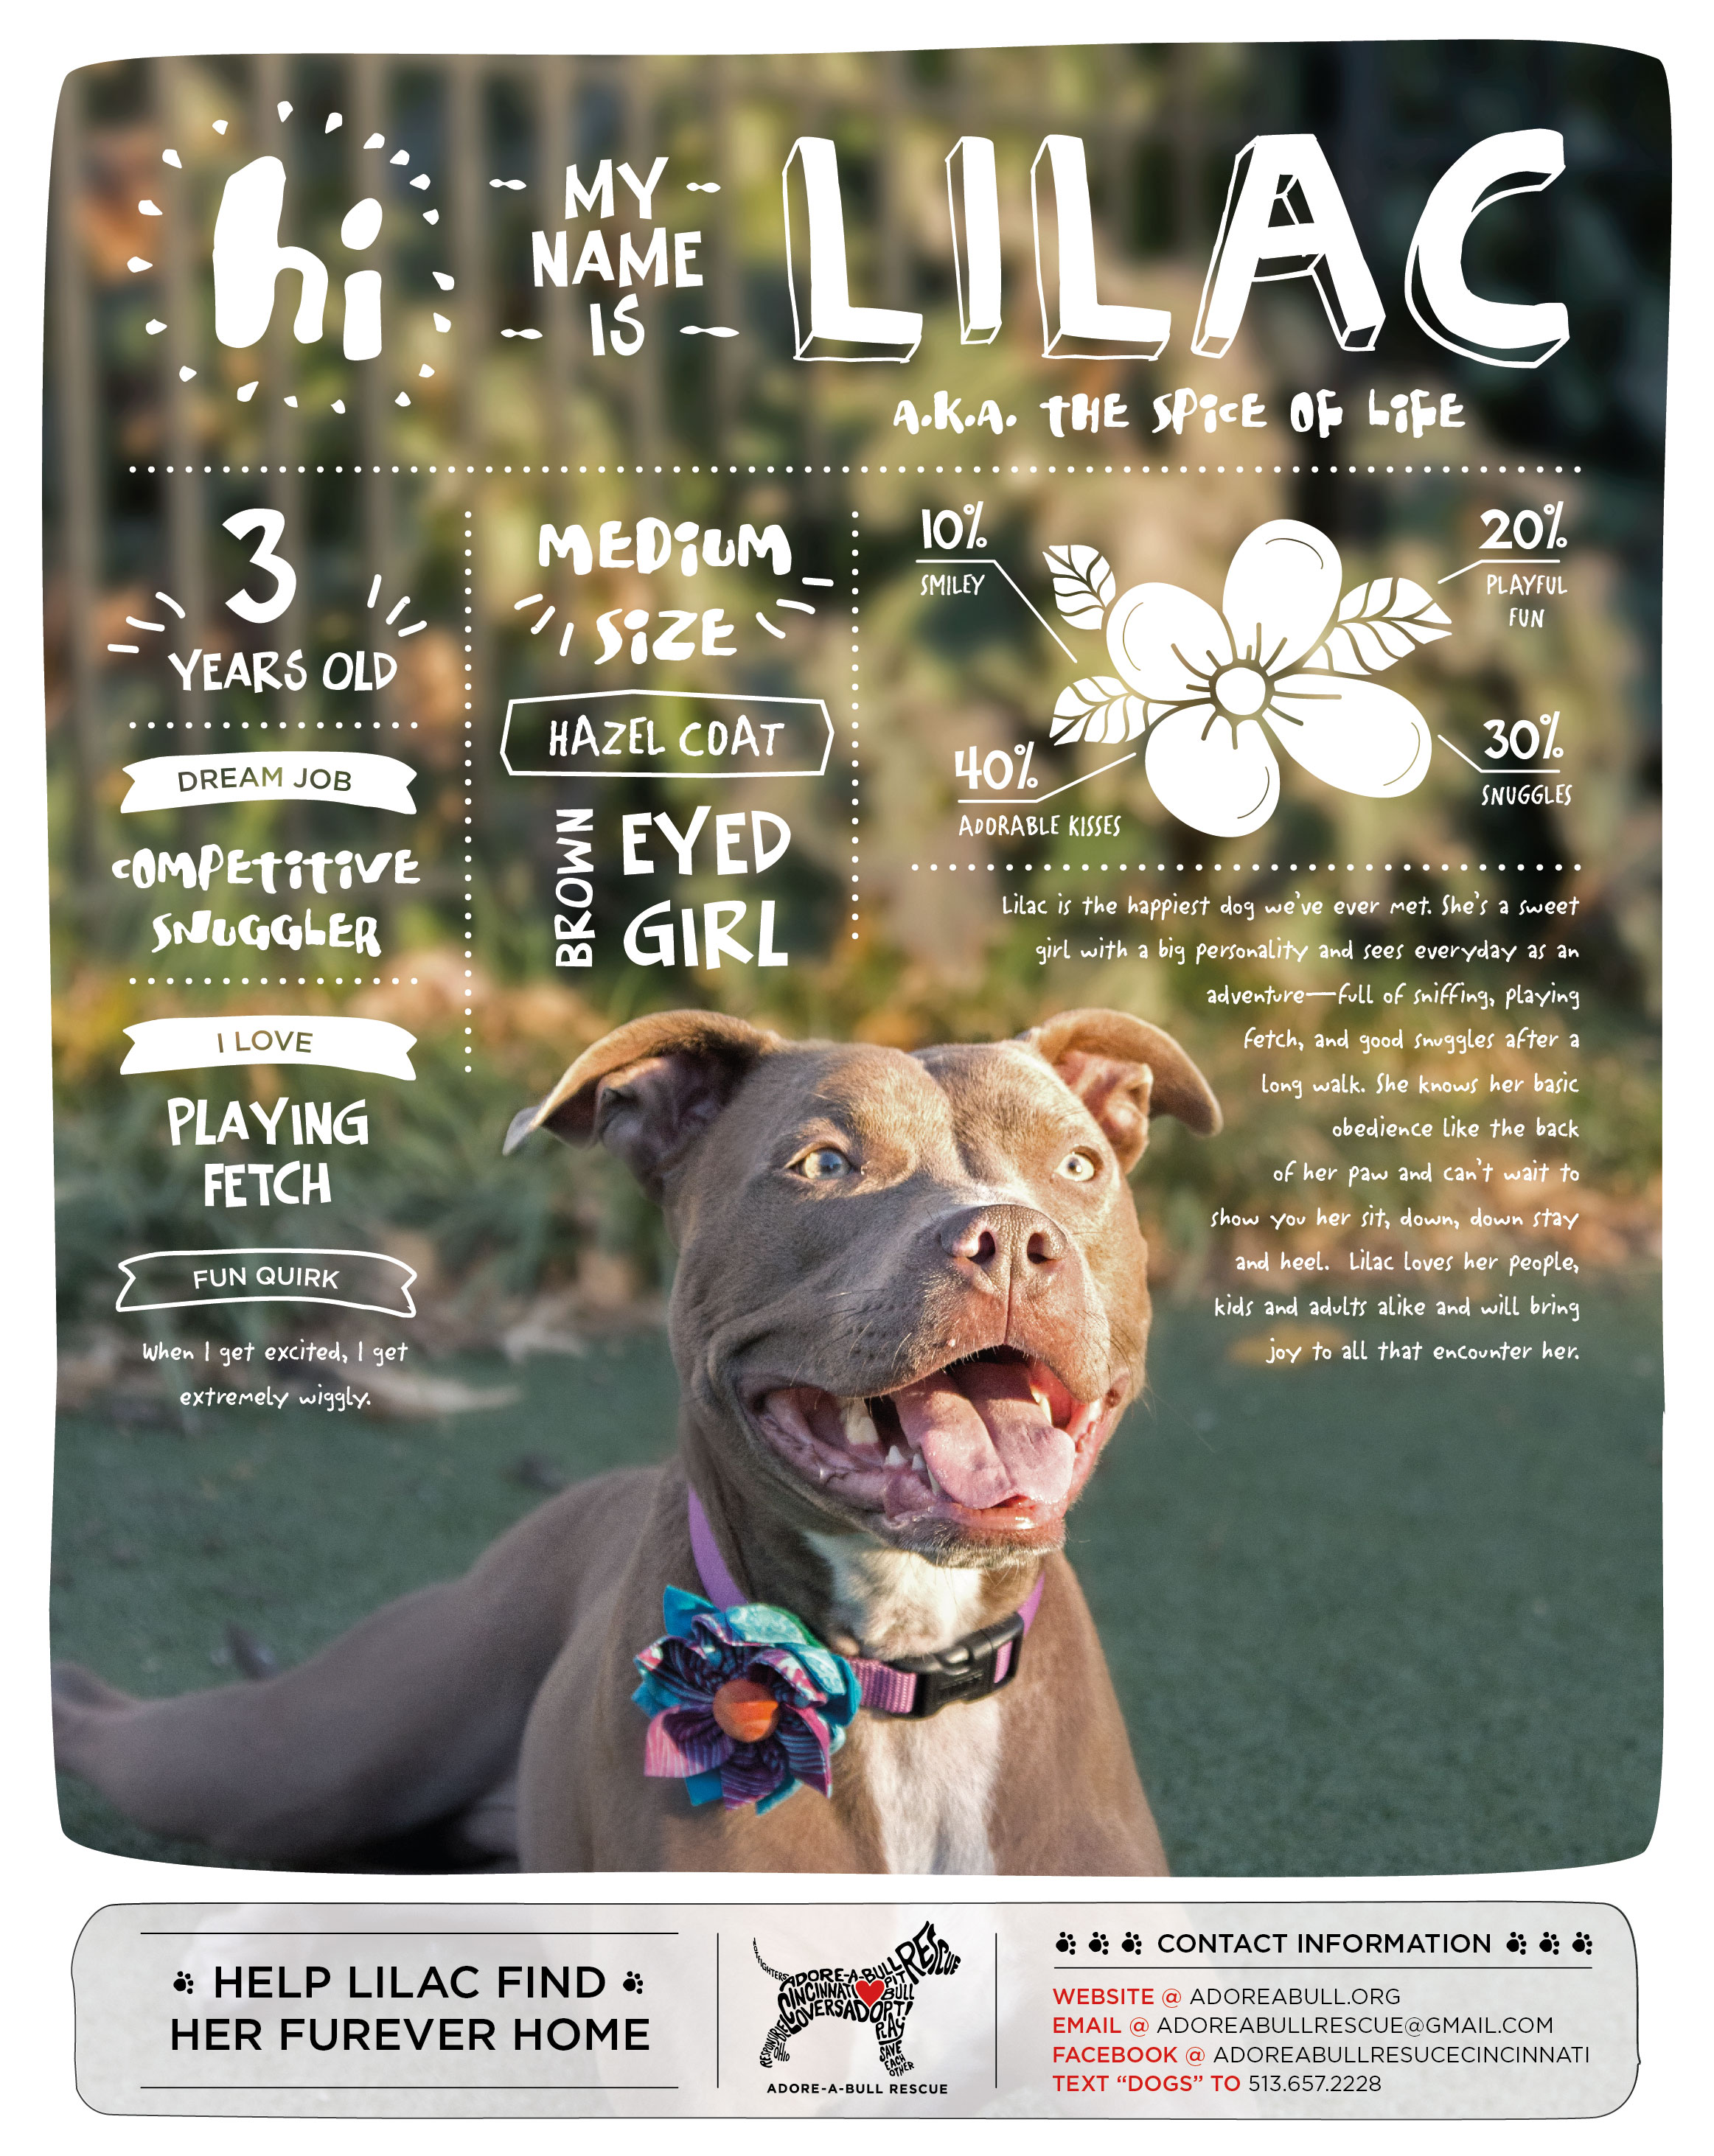 Lilac_Dog_of_the_Month_LPK_AdoreOnly-01